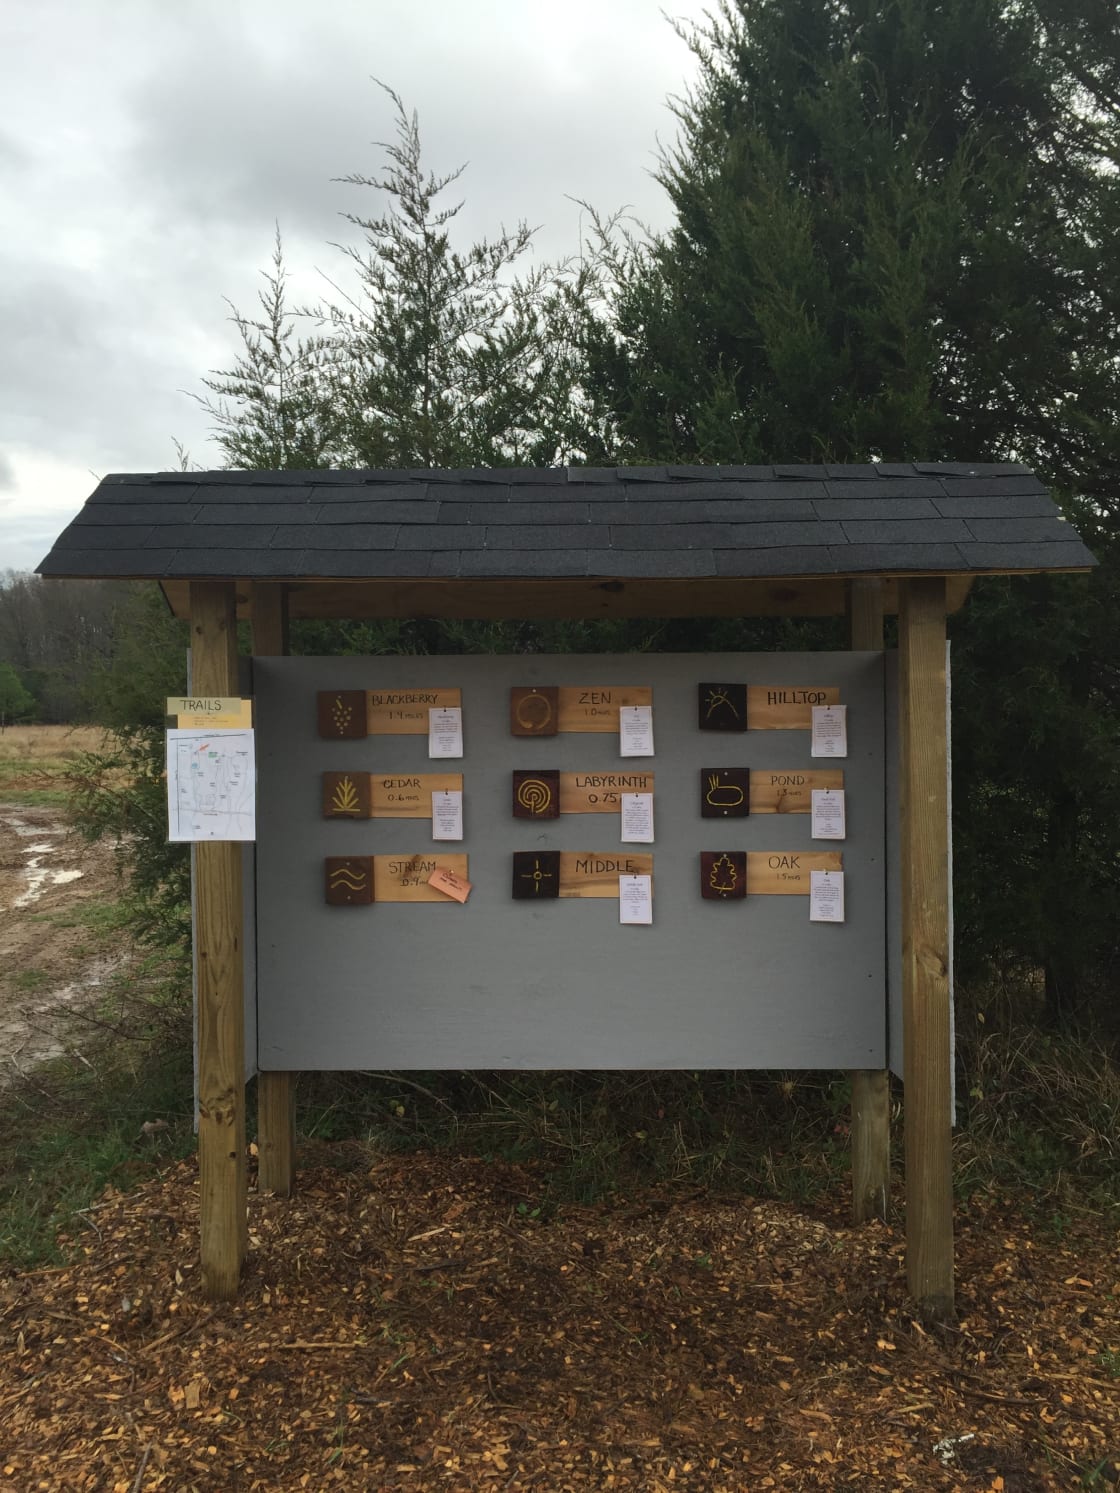 The kiosk with information about hiking trails.